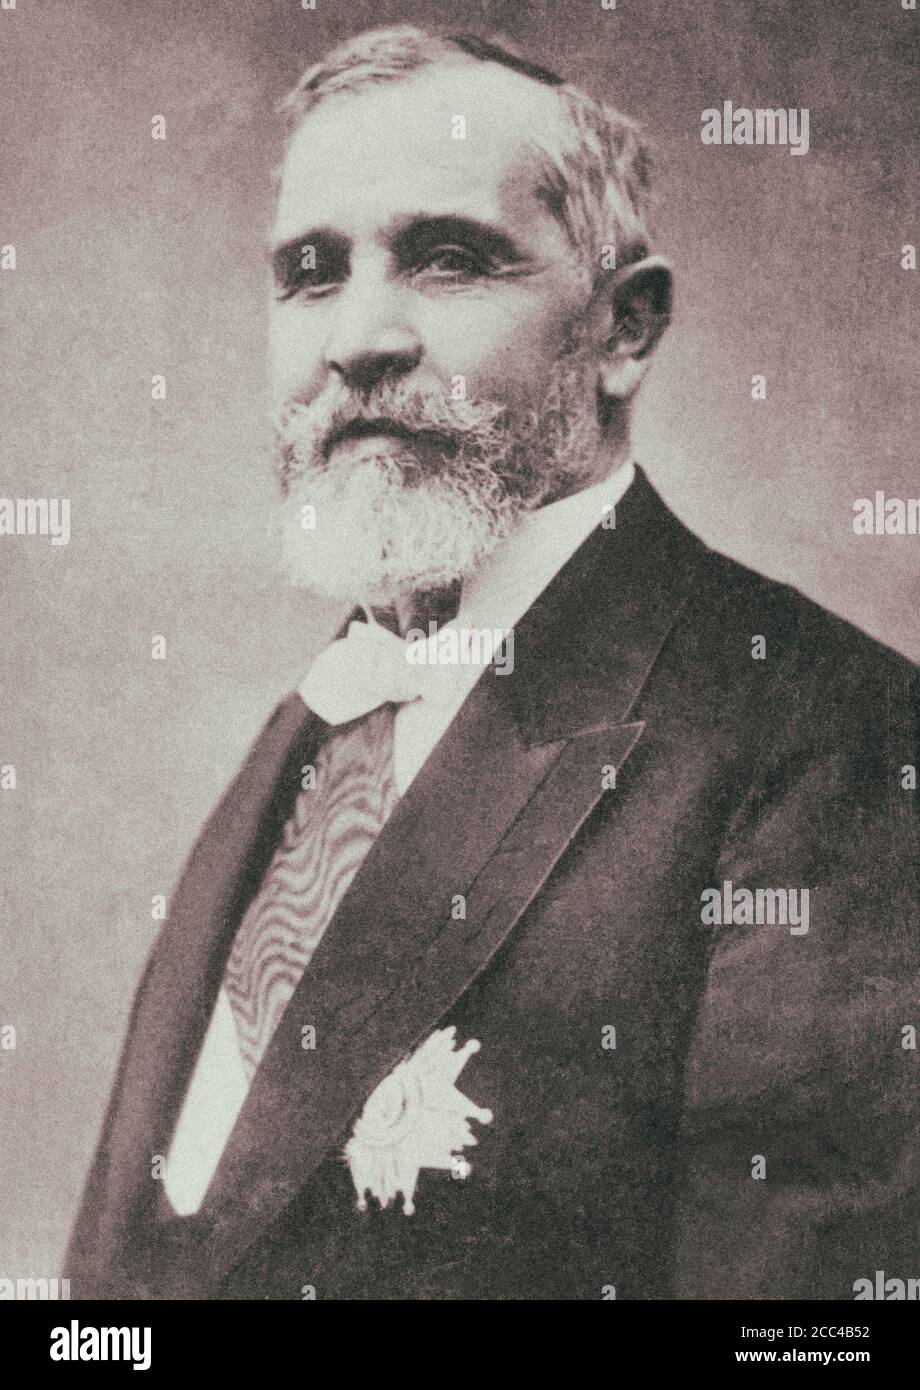 Emile Loubet (1838 – 1929) was the 45th Prime Minister of France and later President of the French Republic (1899–1906). Stock Photo